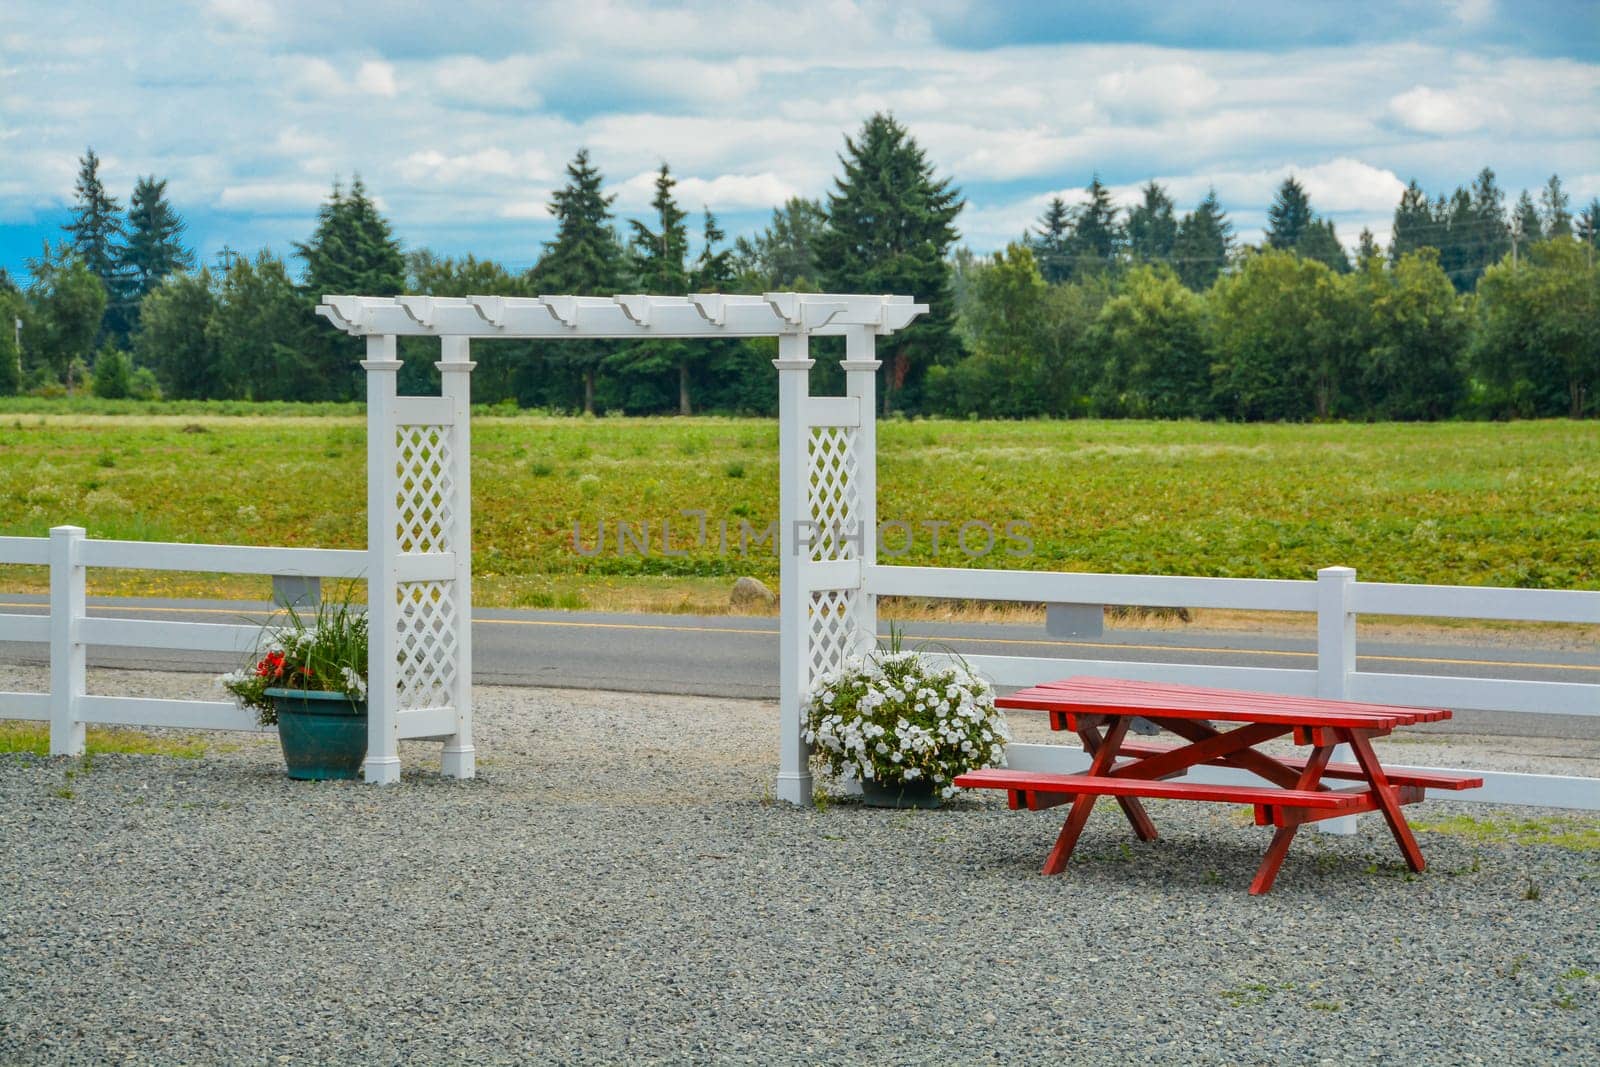 Flowers and red table at the entrance to produce farm store.